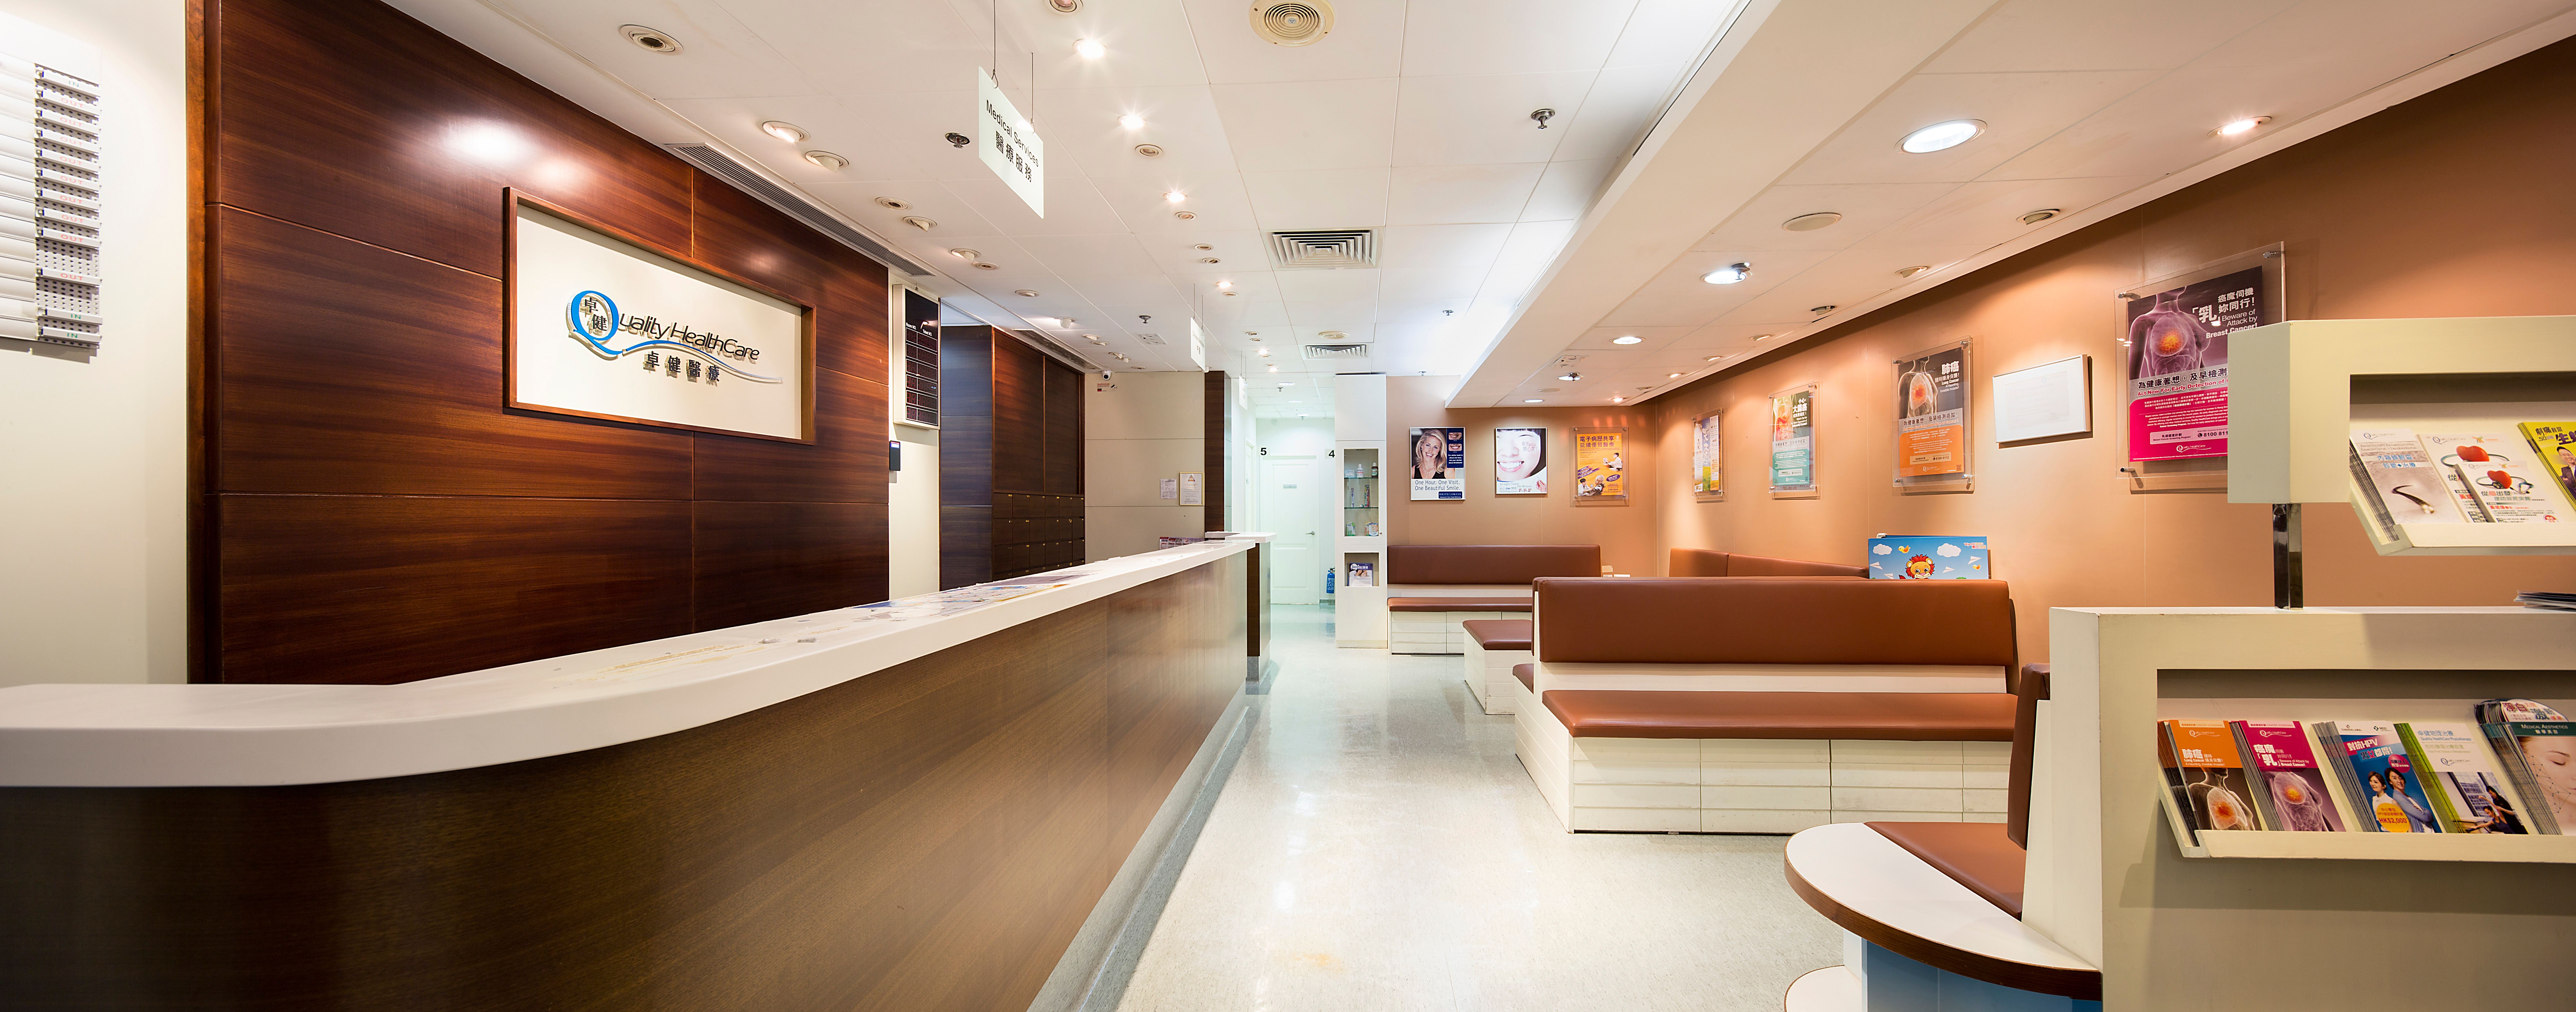 Quality HealthCare Medical Centre waiting area and reception